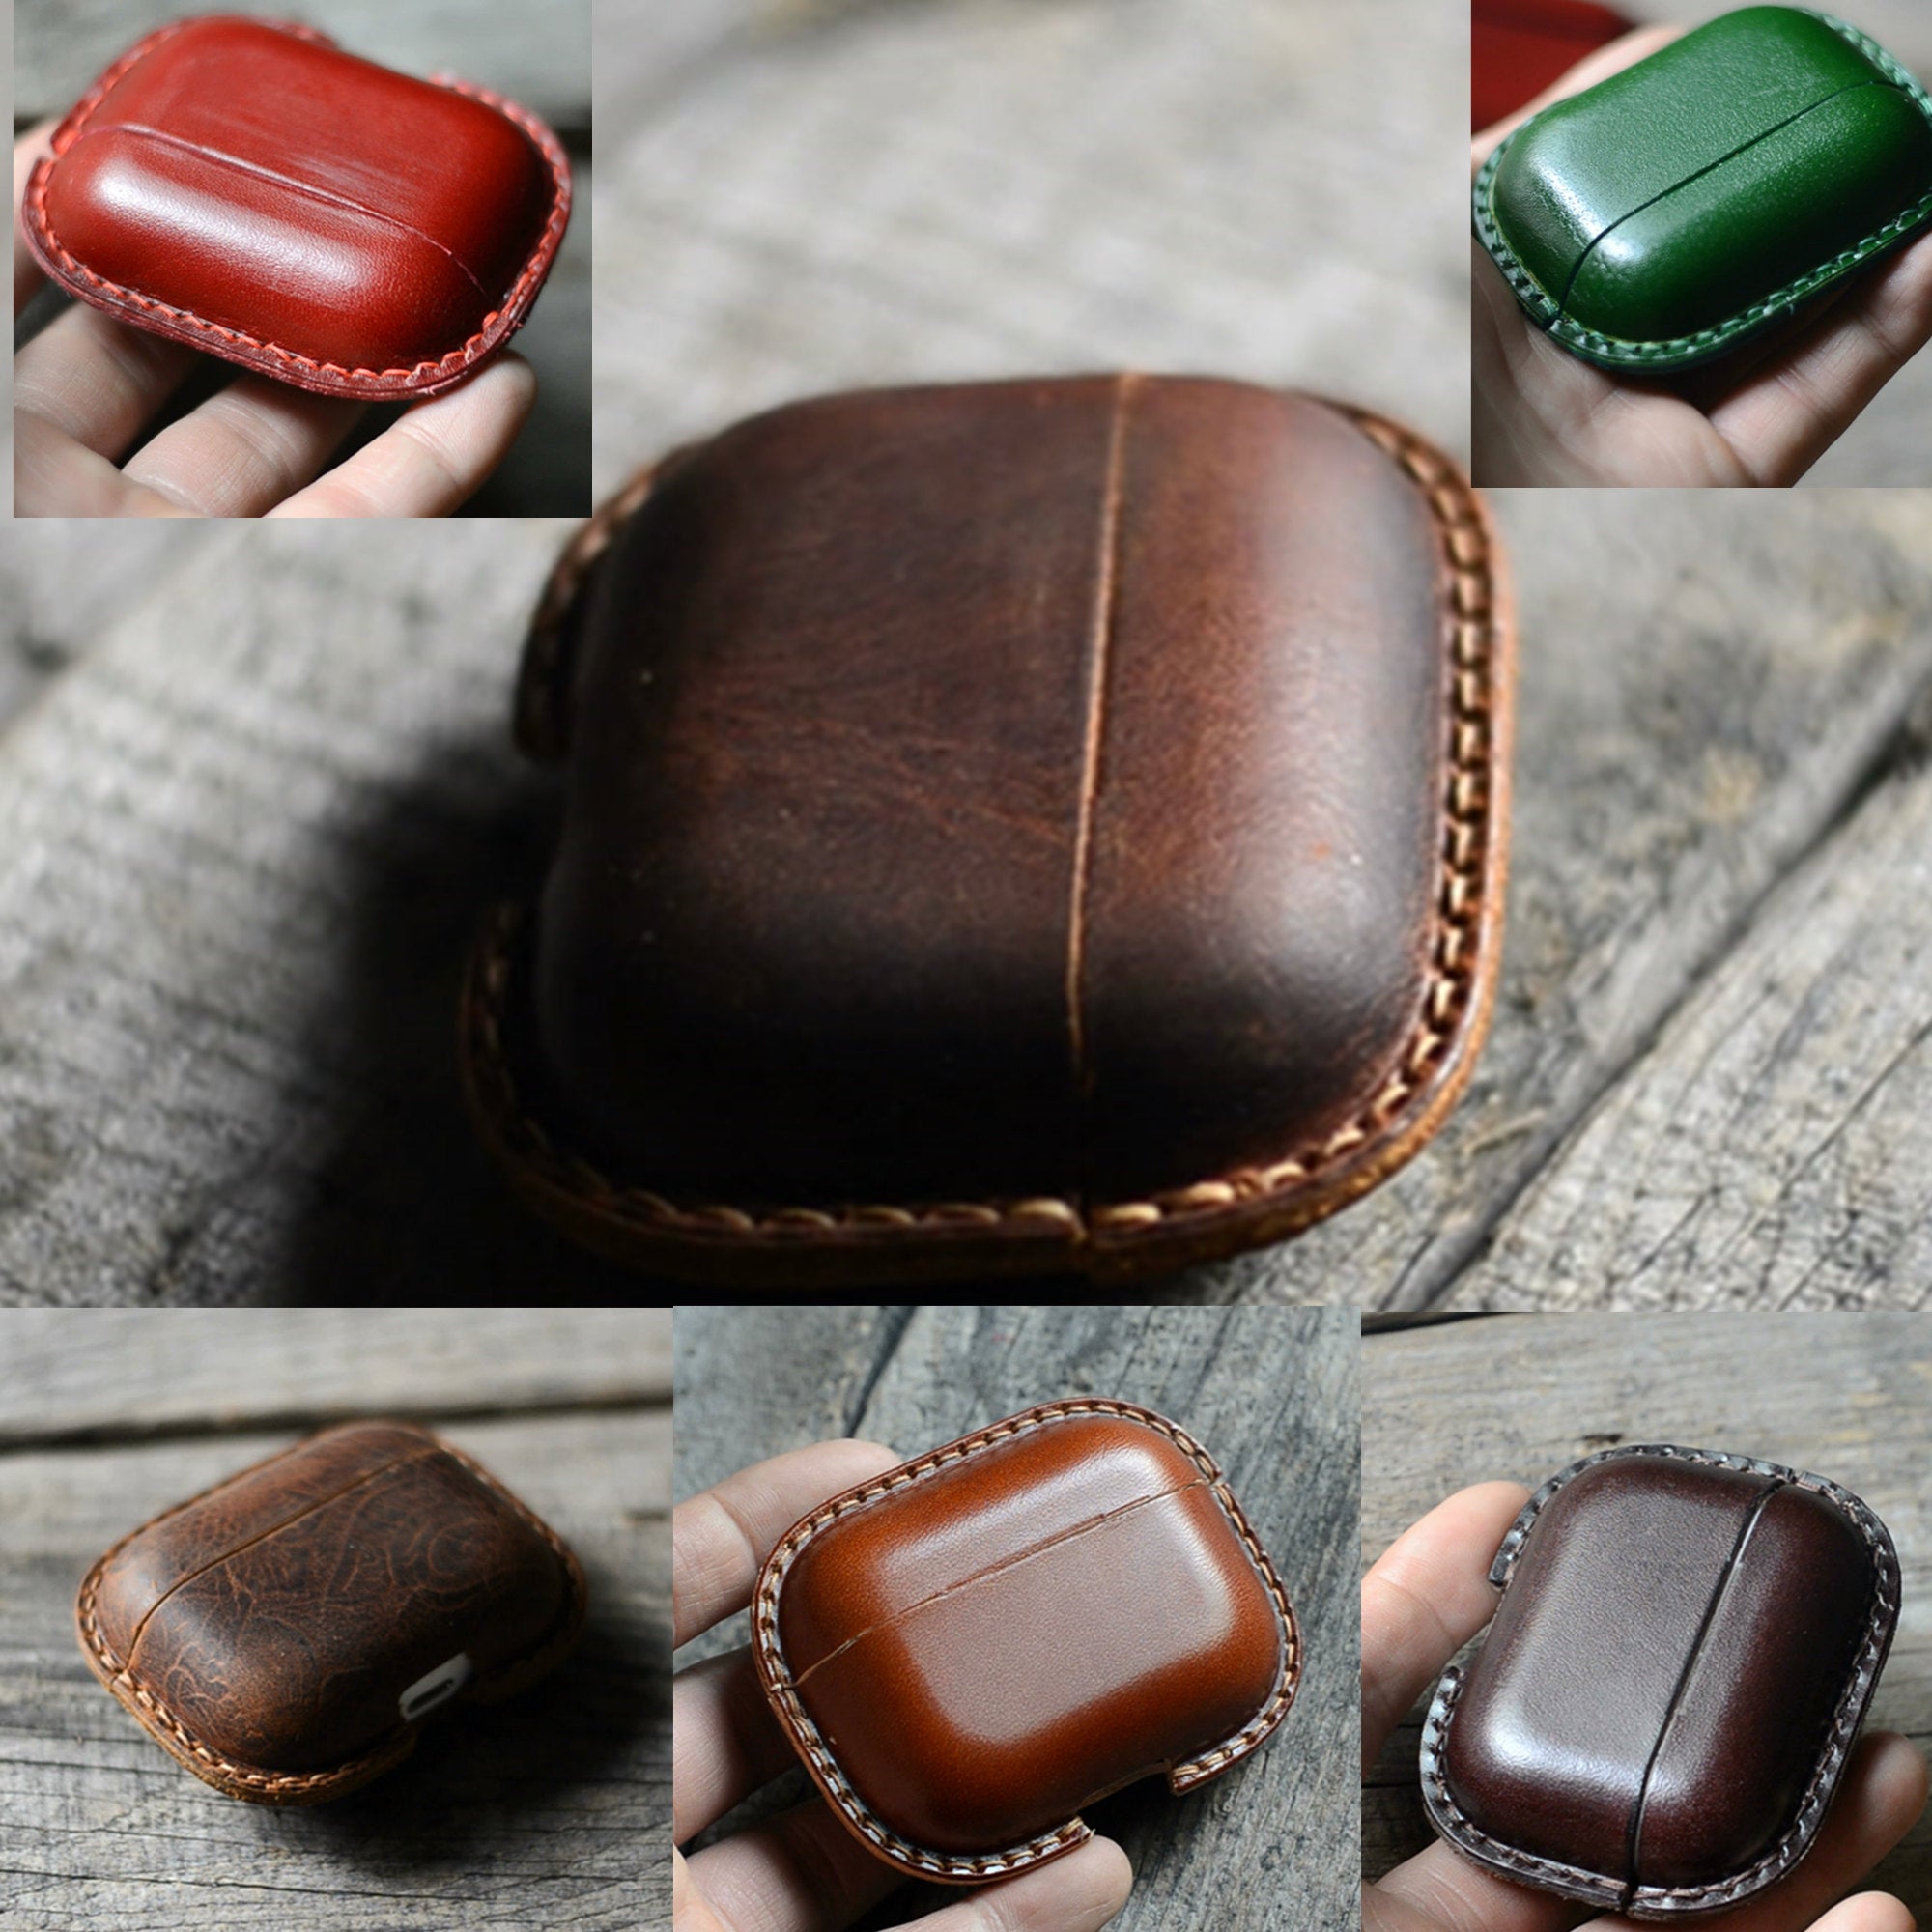 Case Air Pod Pro Custom Leather, Apple Airpods Case Leather